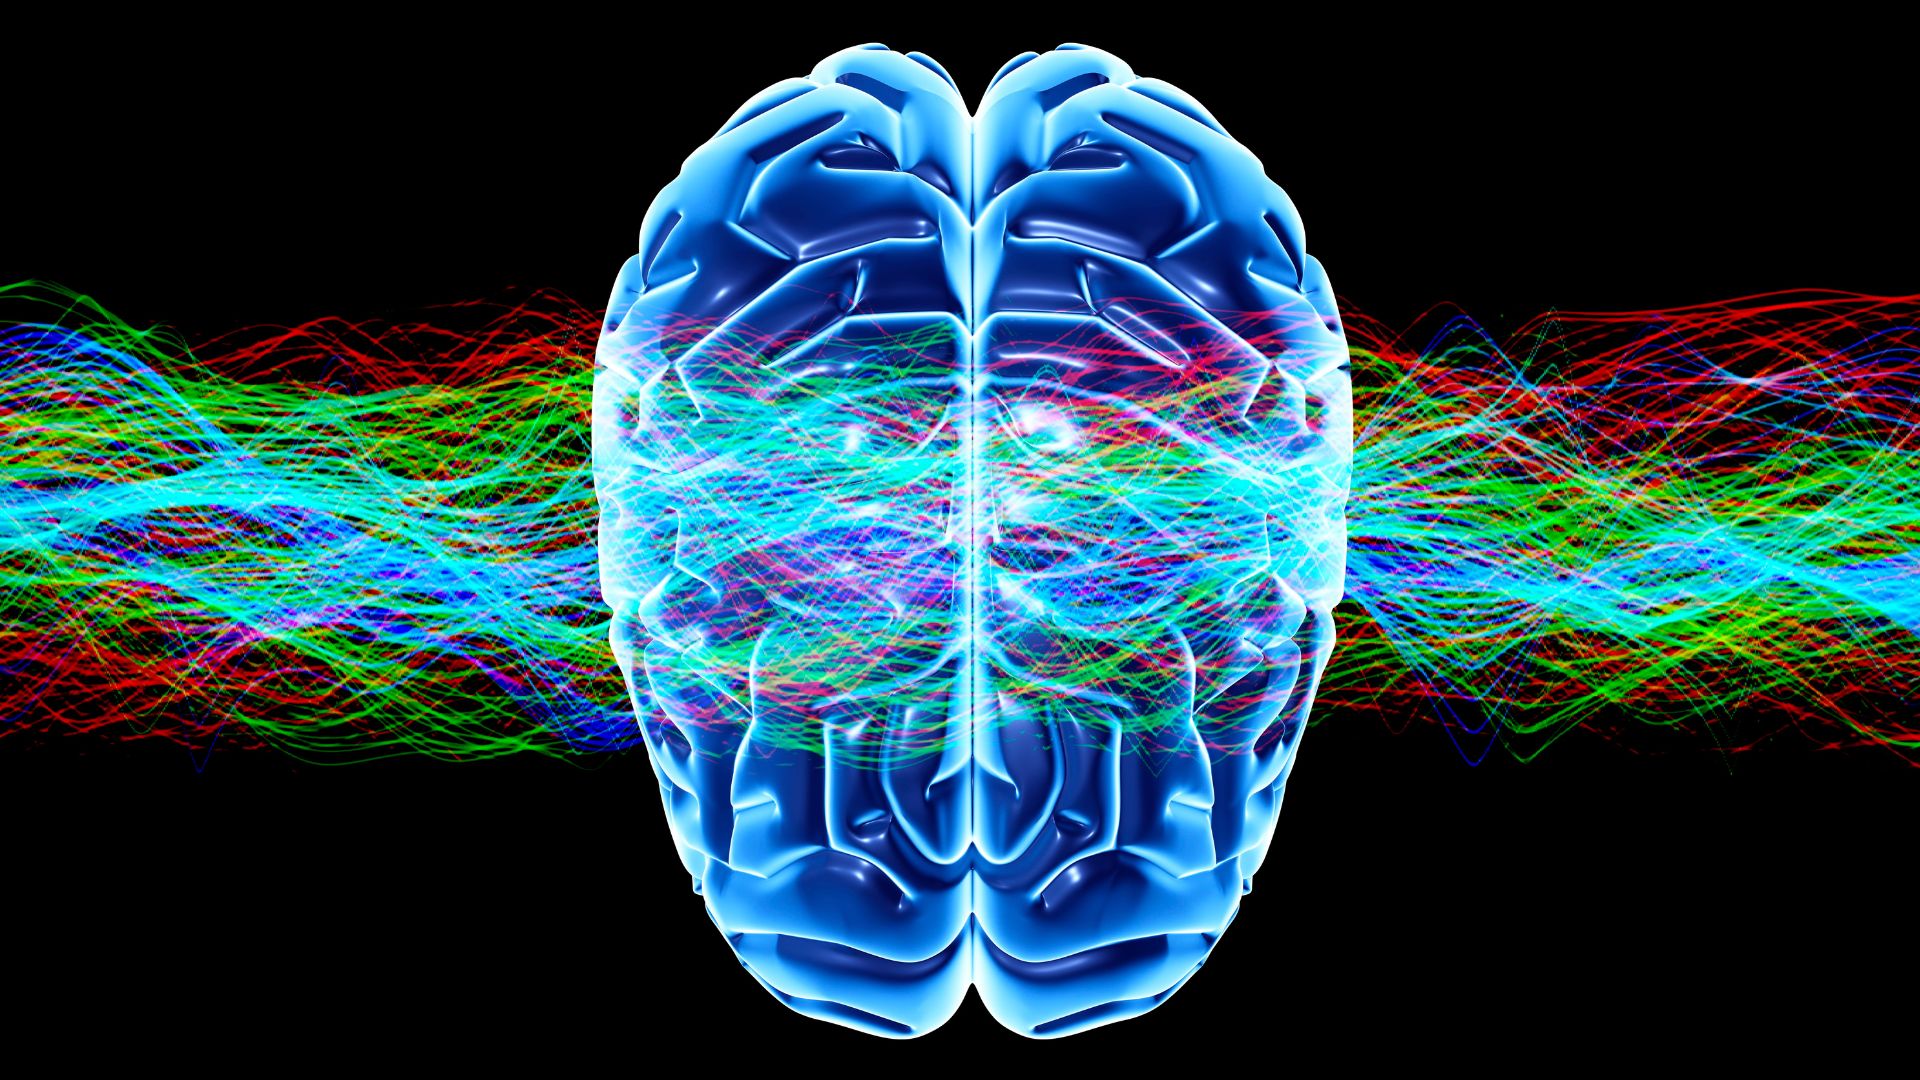 illustration of a human brain with rainbow colored waves running across it